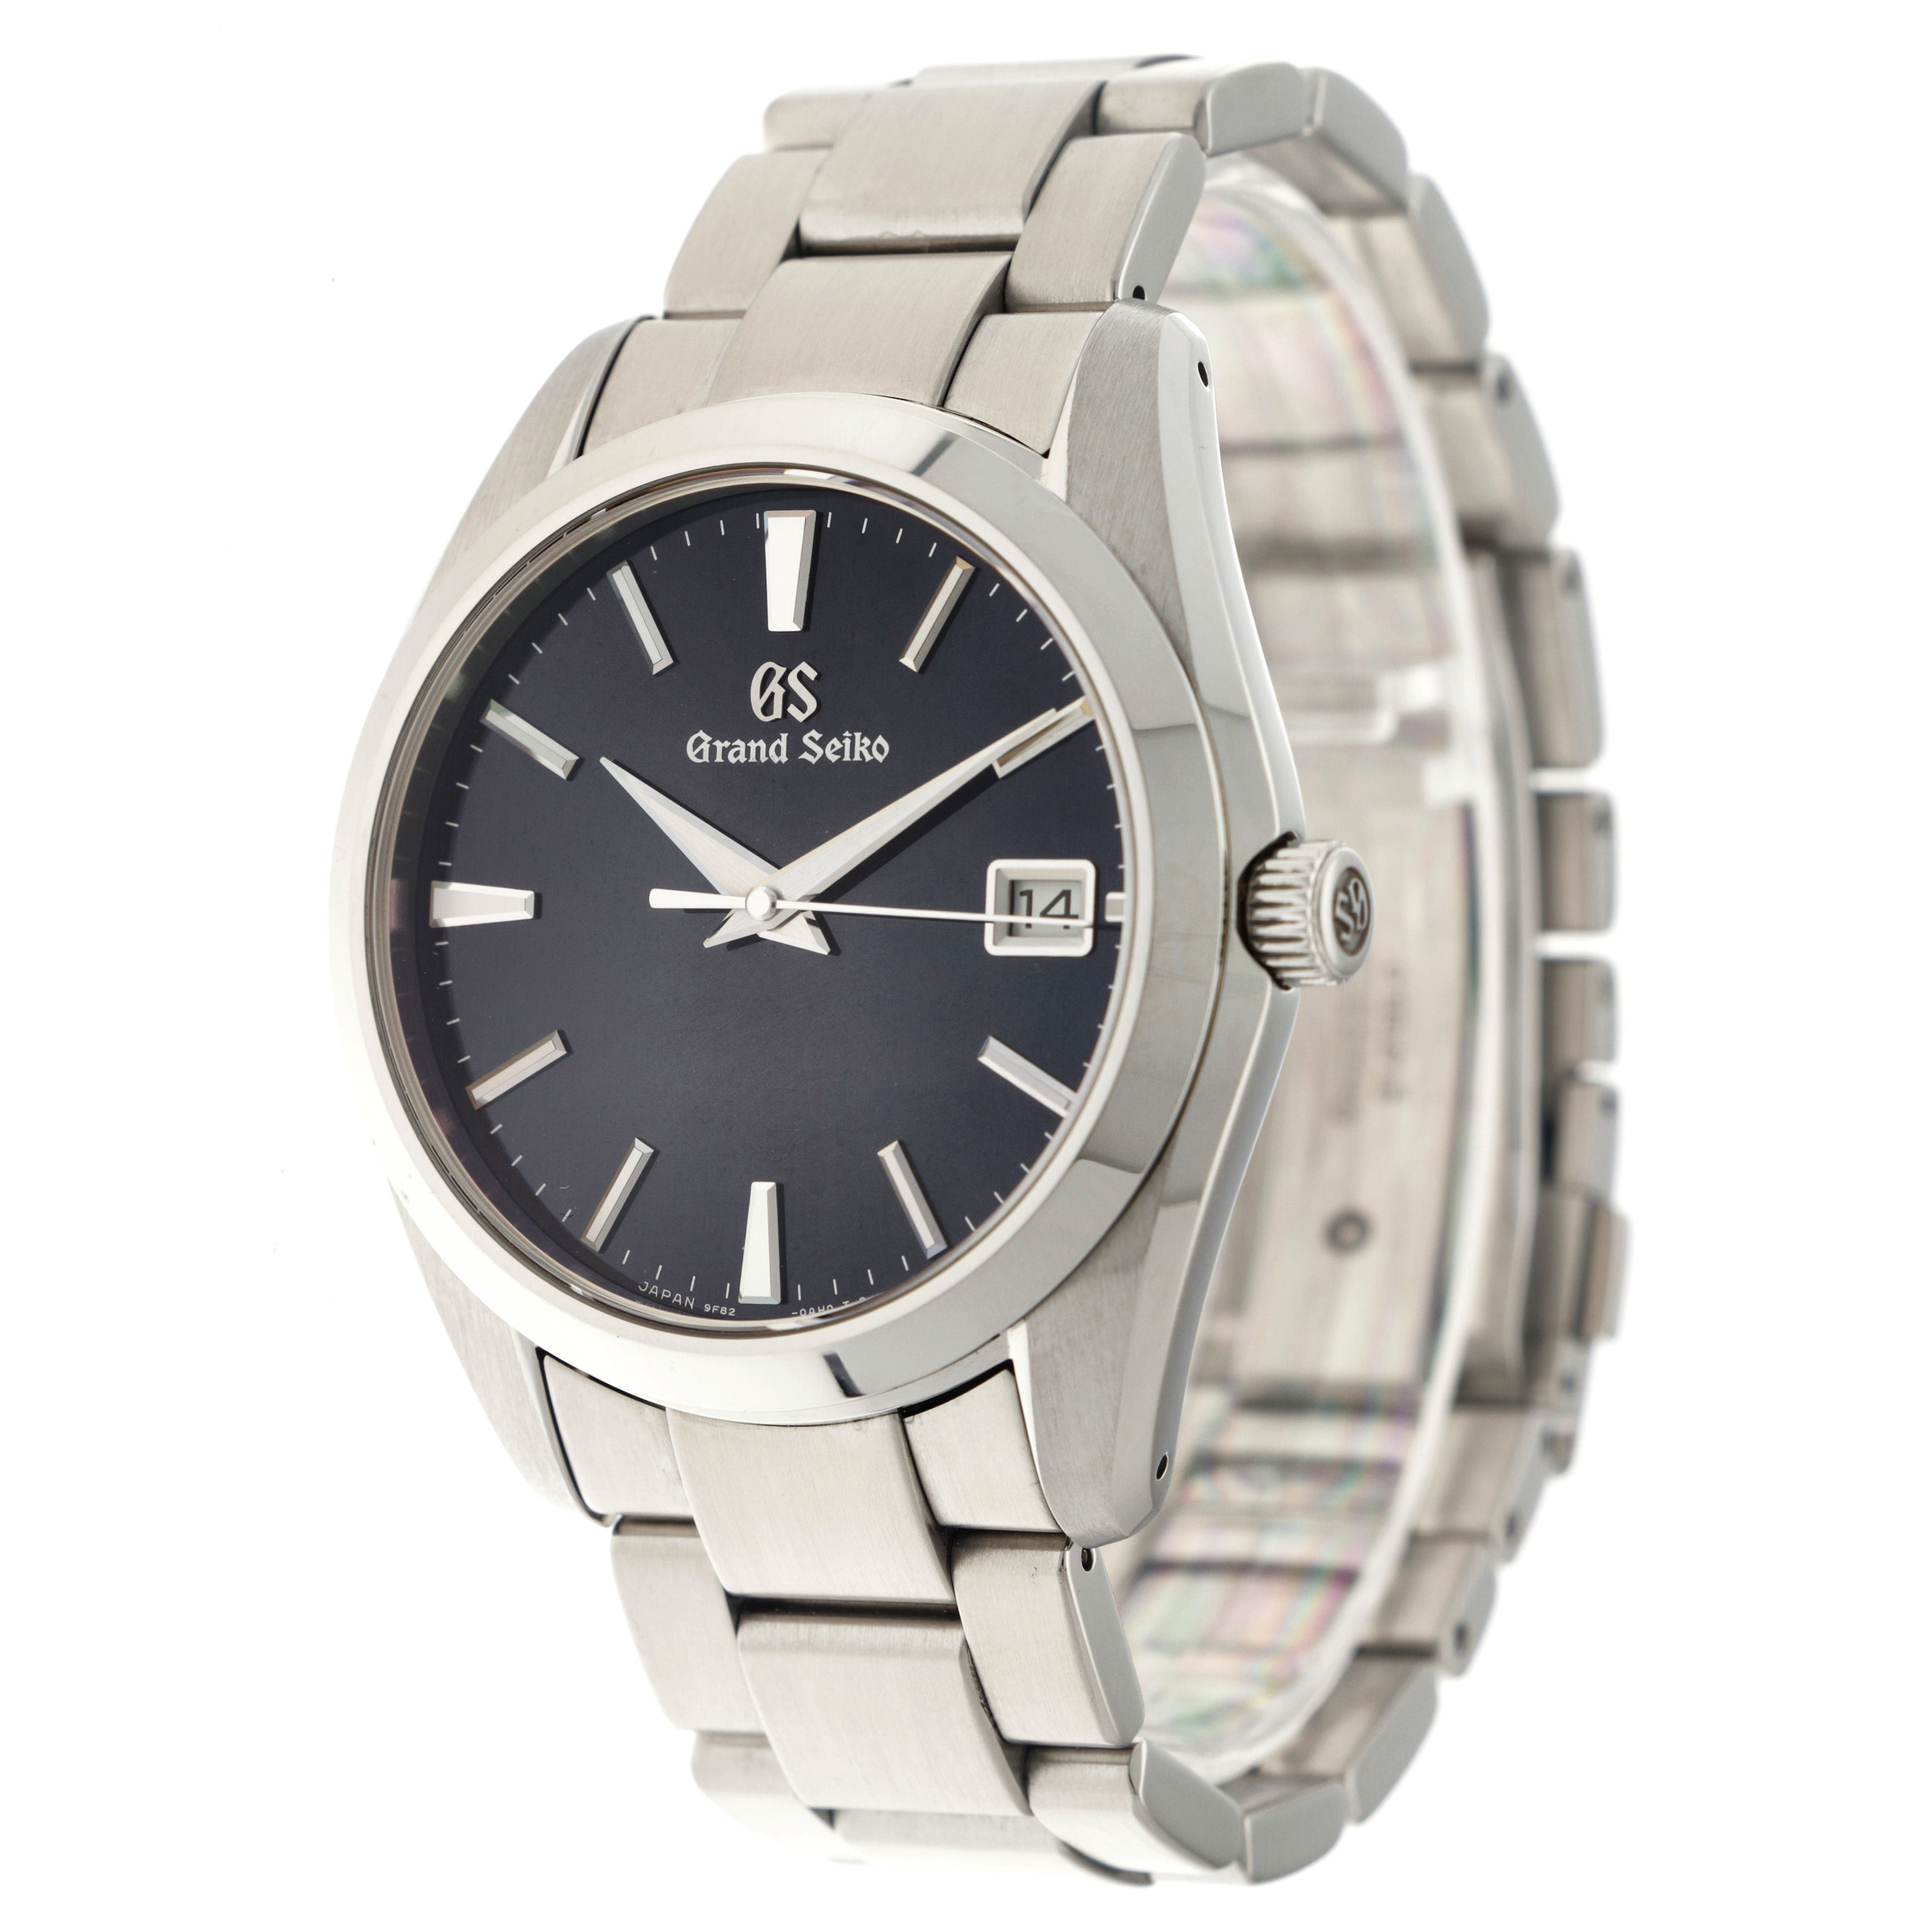 No reserve - Grand Seiko Heritage Collection 9F82-0AF0 - Men's watch - approx. 2020. - Image 3 of 7